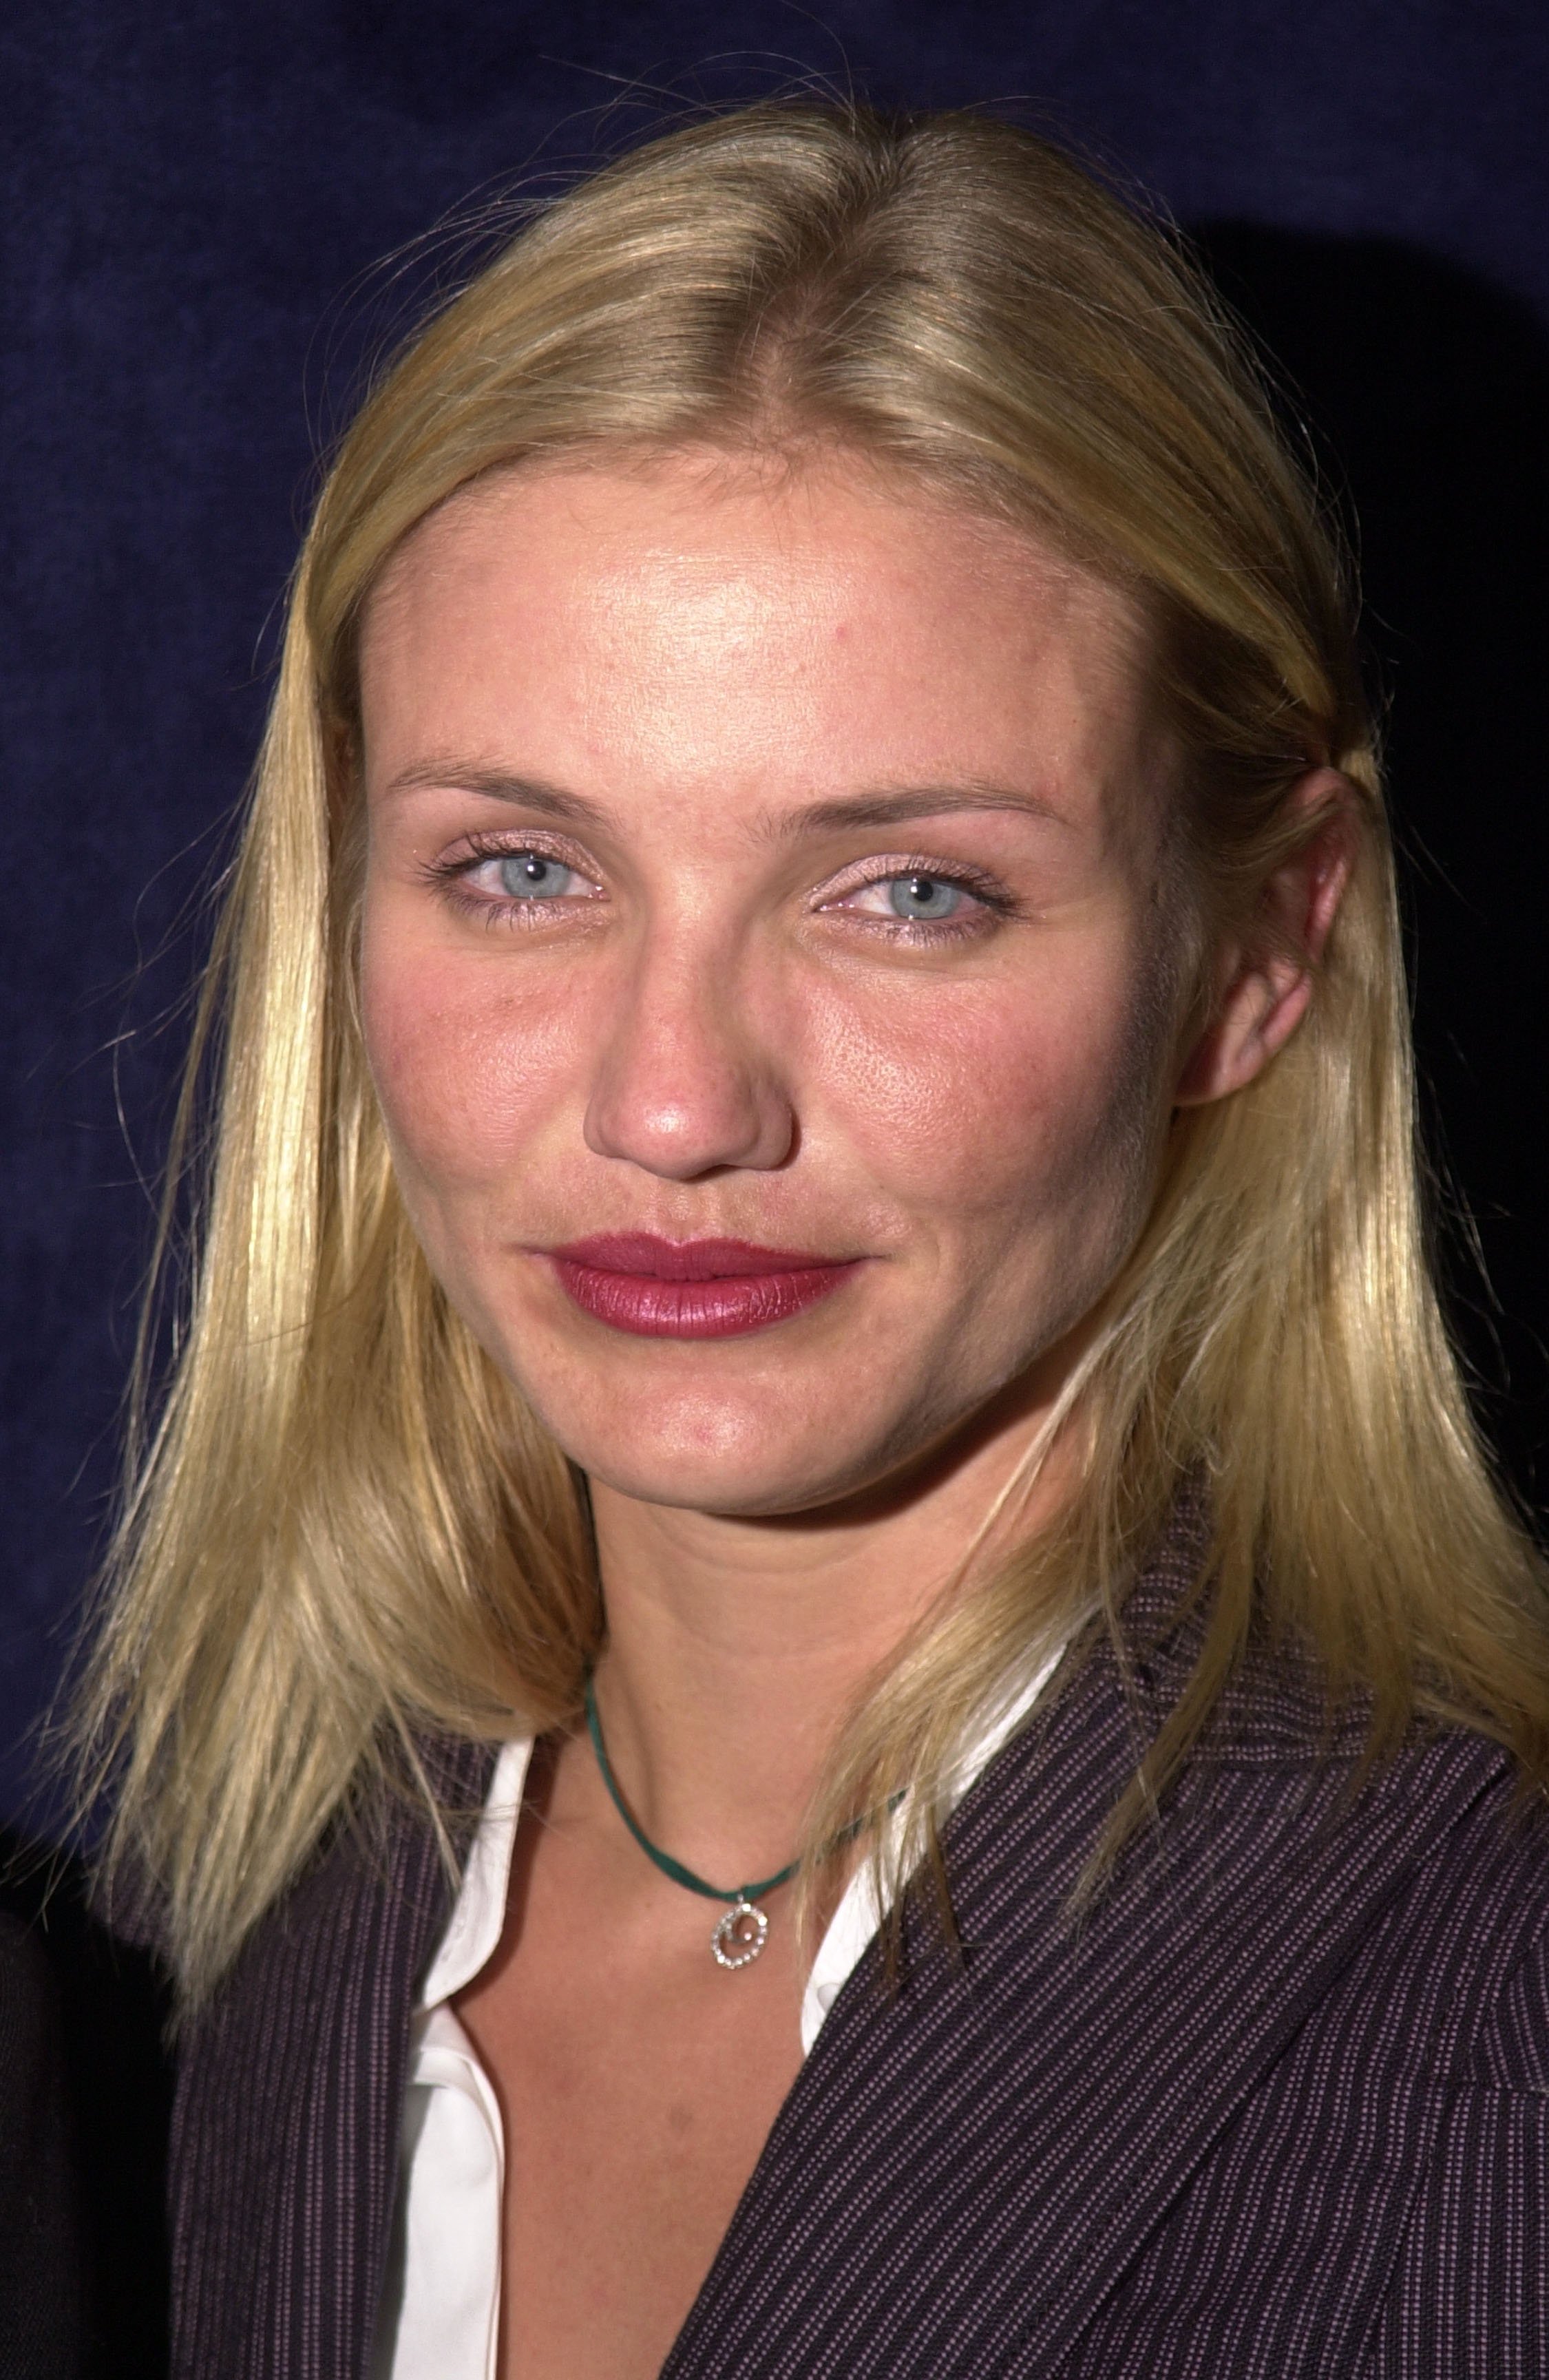 Cameron Diaz at the 5th Annual Hollywood Film Festival Gala Ceremony Awards on August 6, 2001, in Beverly Hills | Source: Getty Images